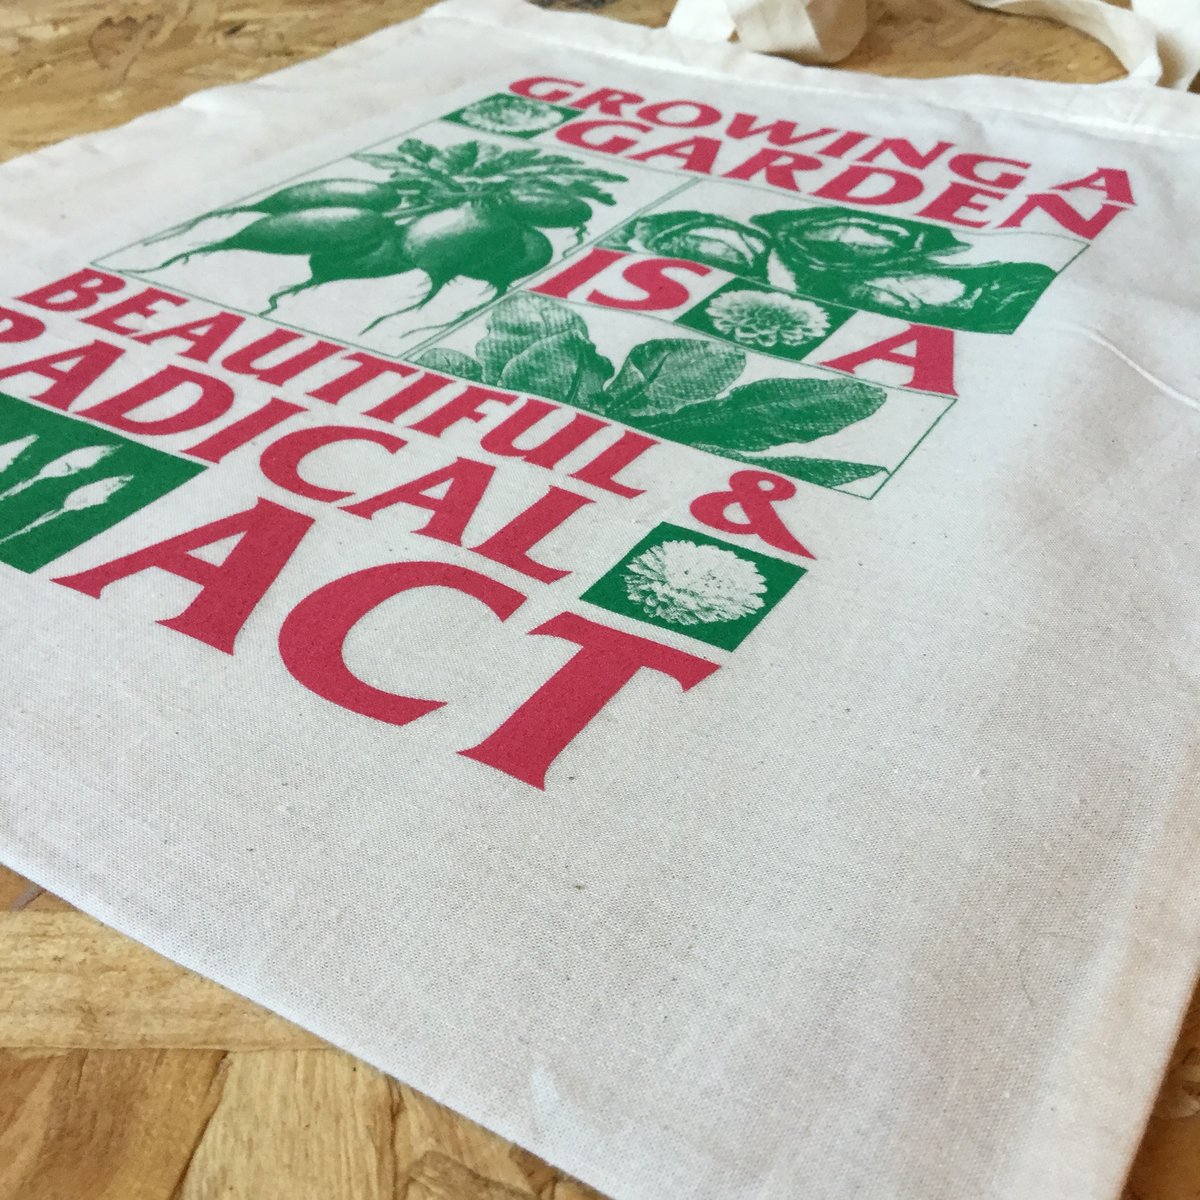 Image of Growing a Garden is a Beautiful and Radical Act tote bag